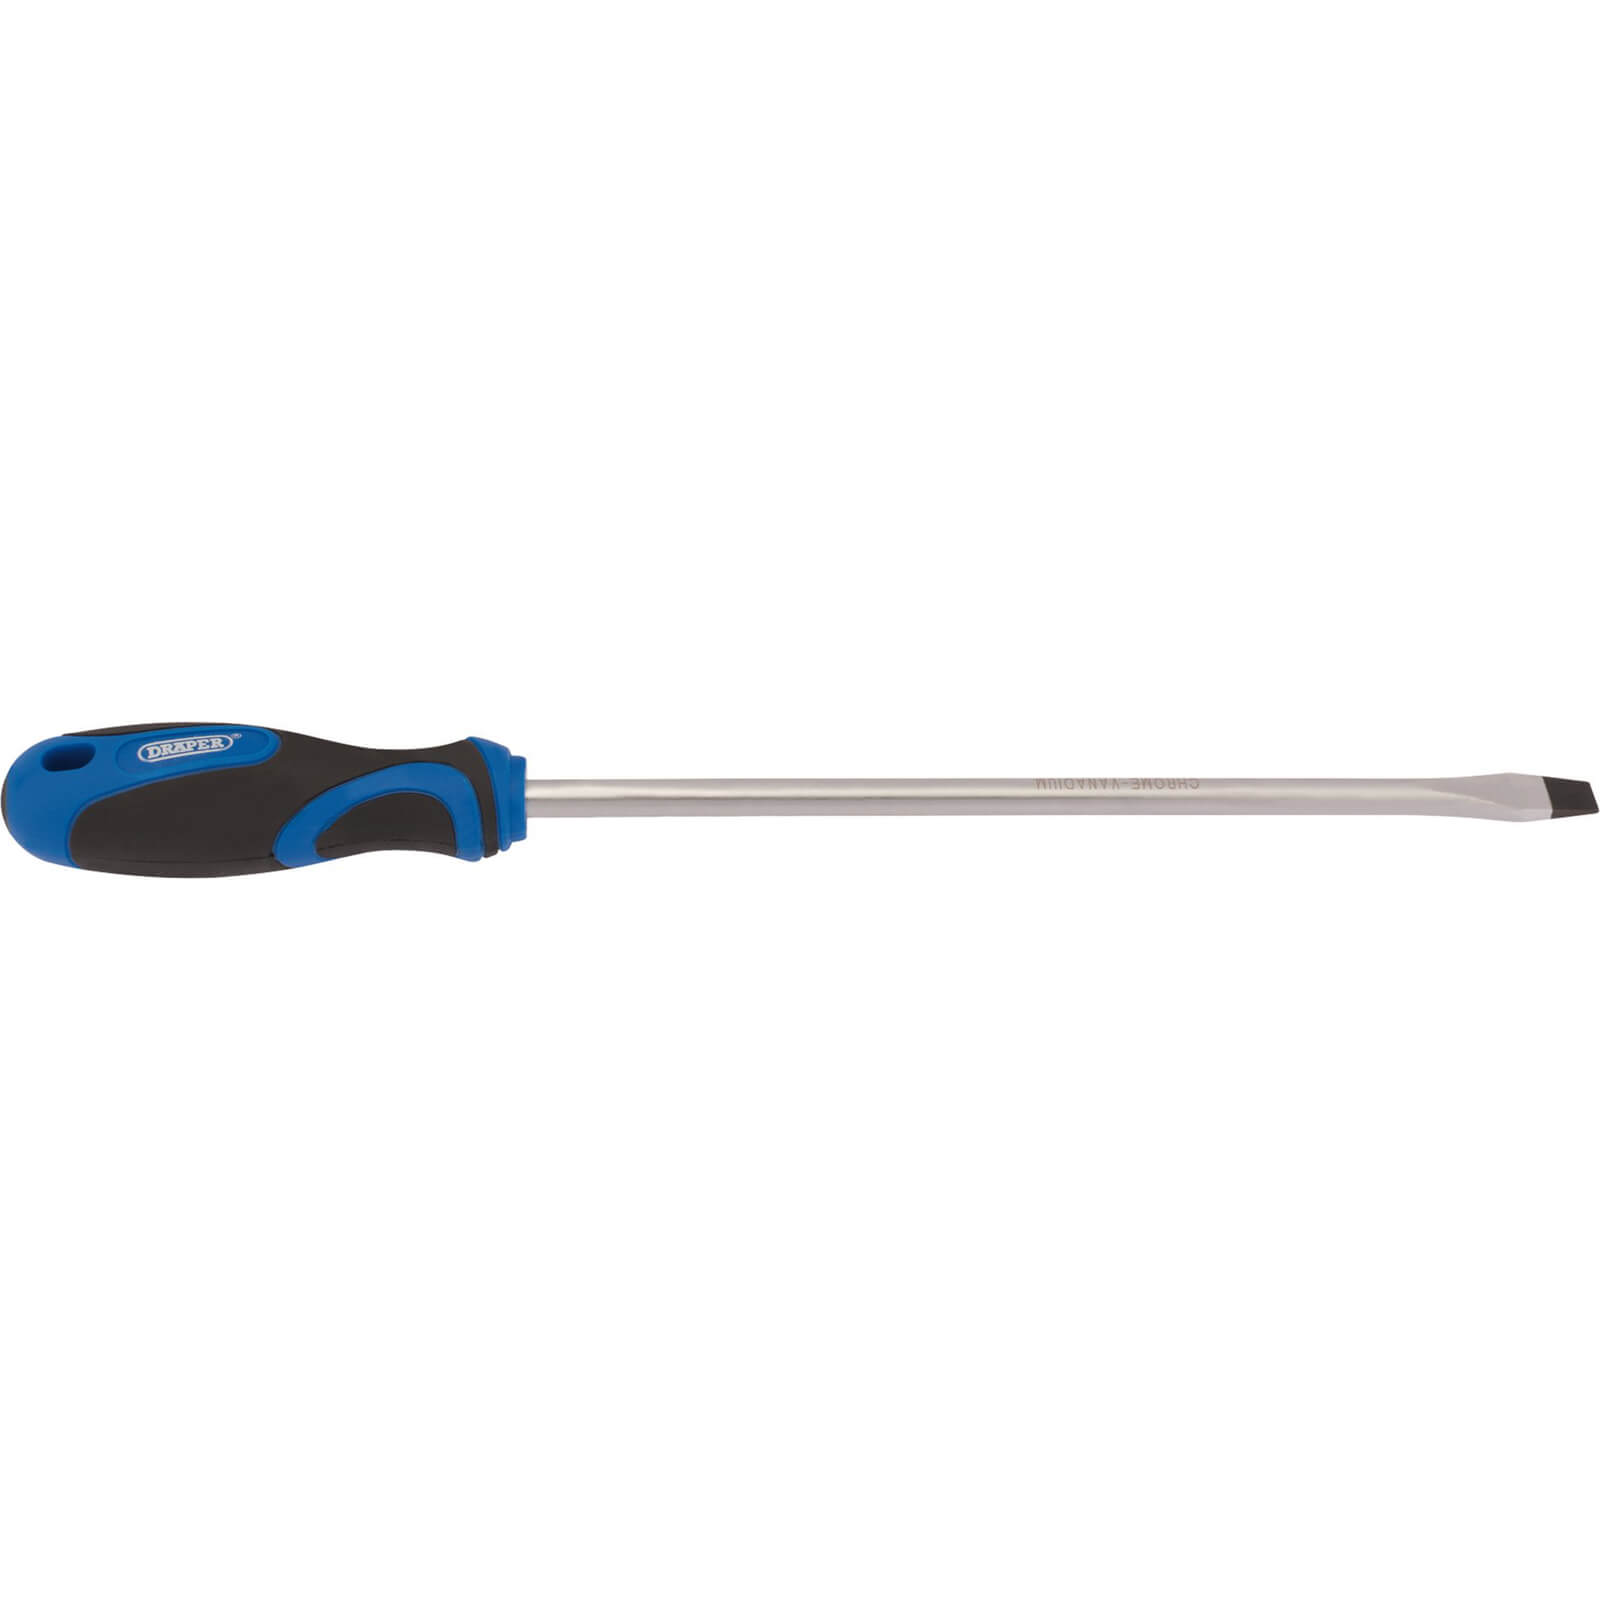 Photo of Draper Flared Slotted Screwdriver 9.5mm 250mm